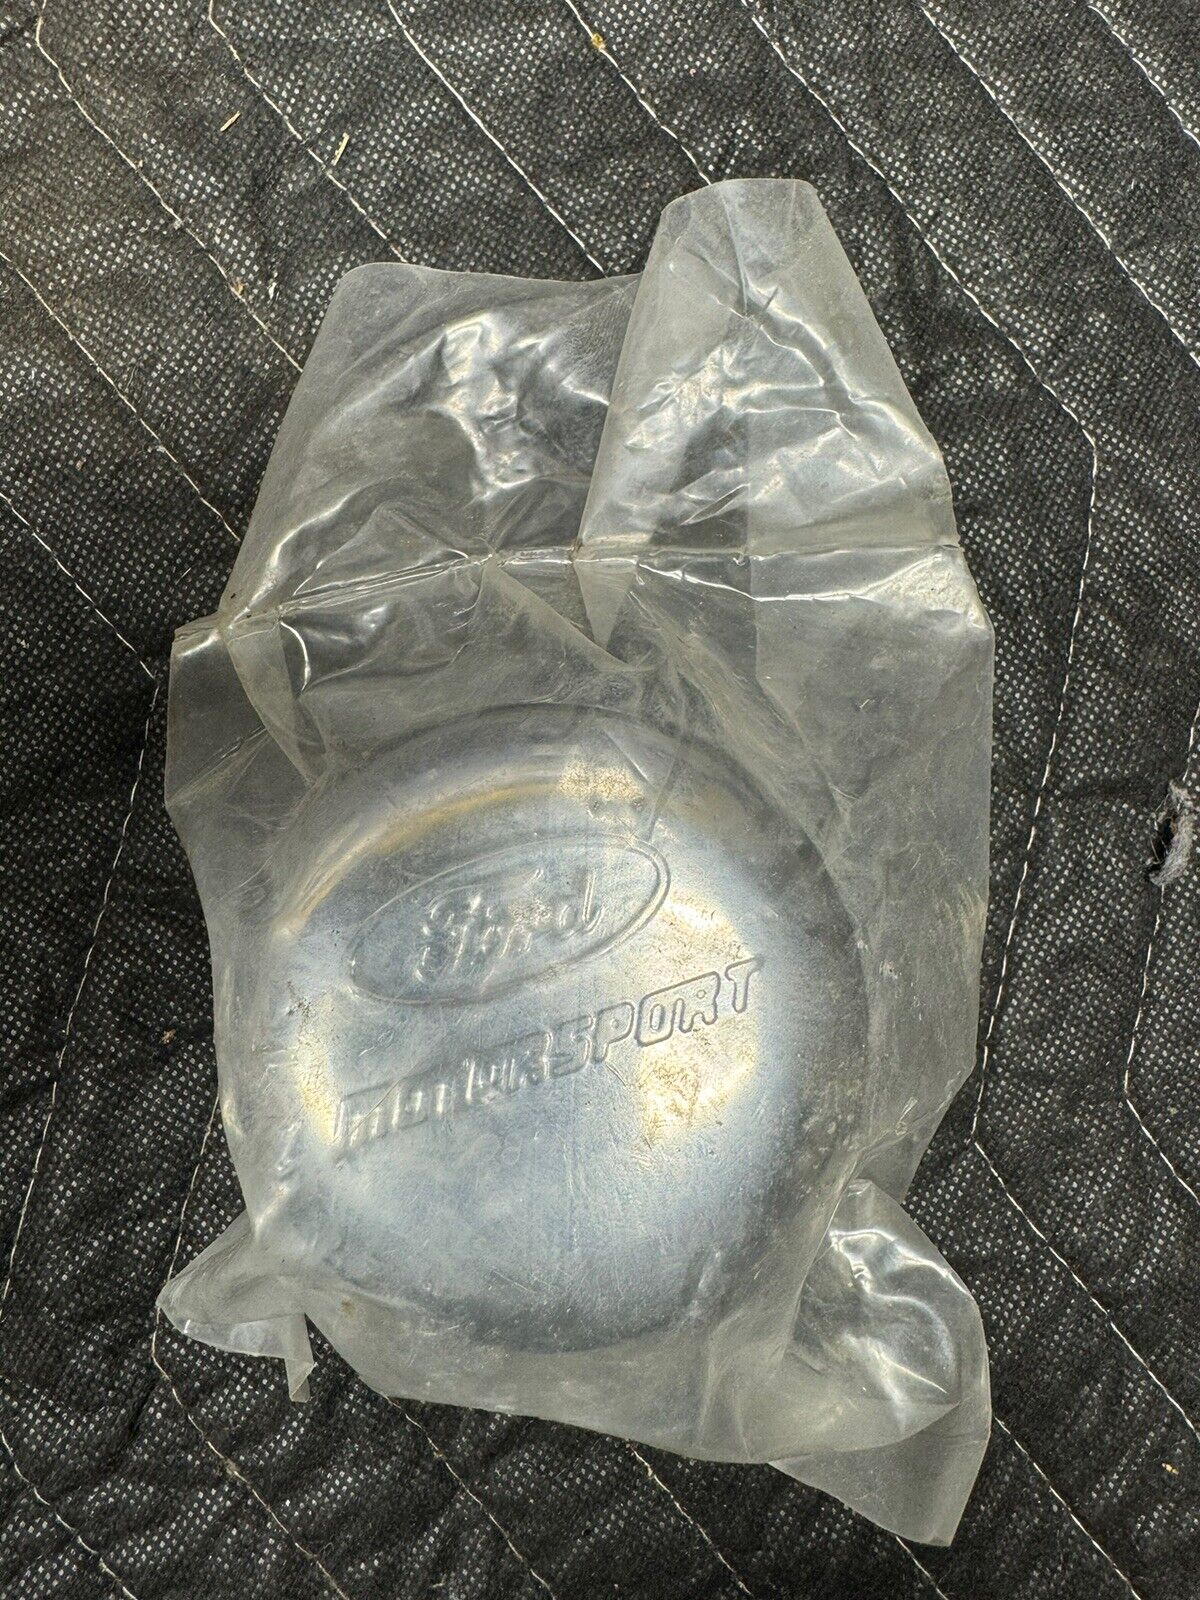 NOS Ford Motorsports Chrome Oil Push-In Breather Cap